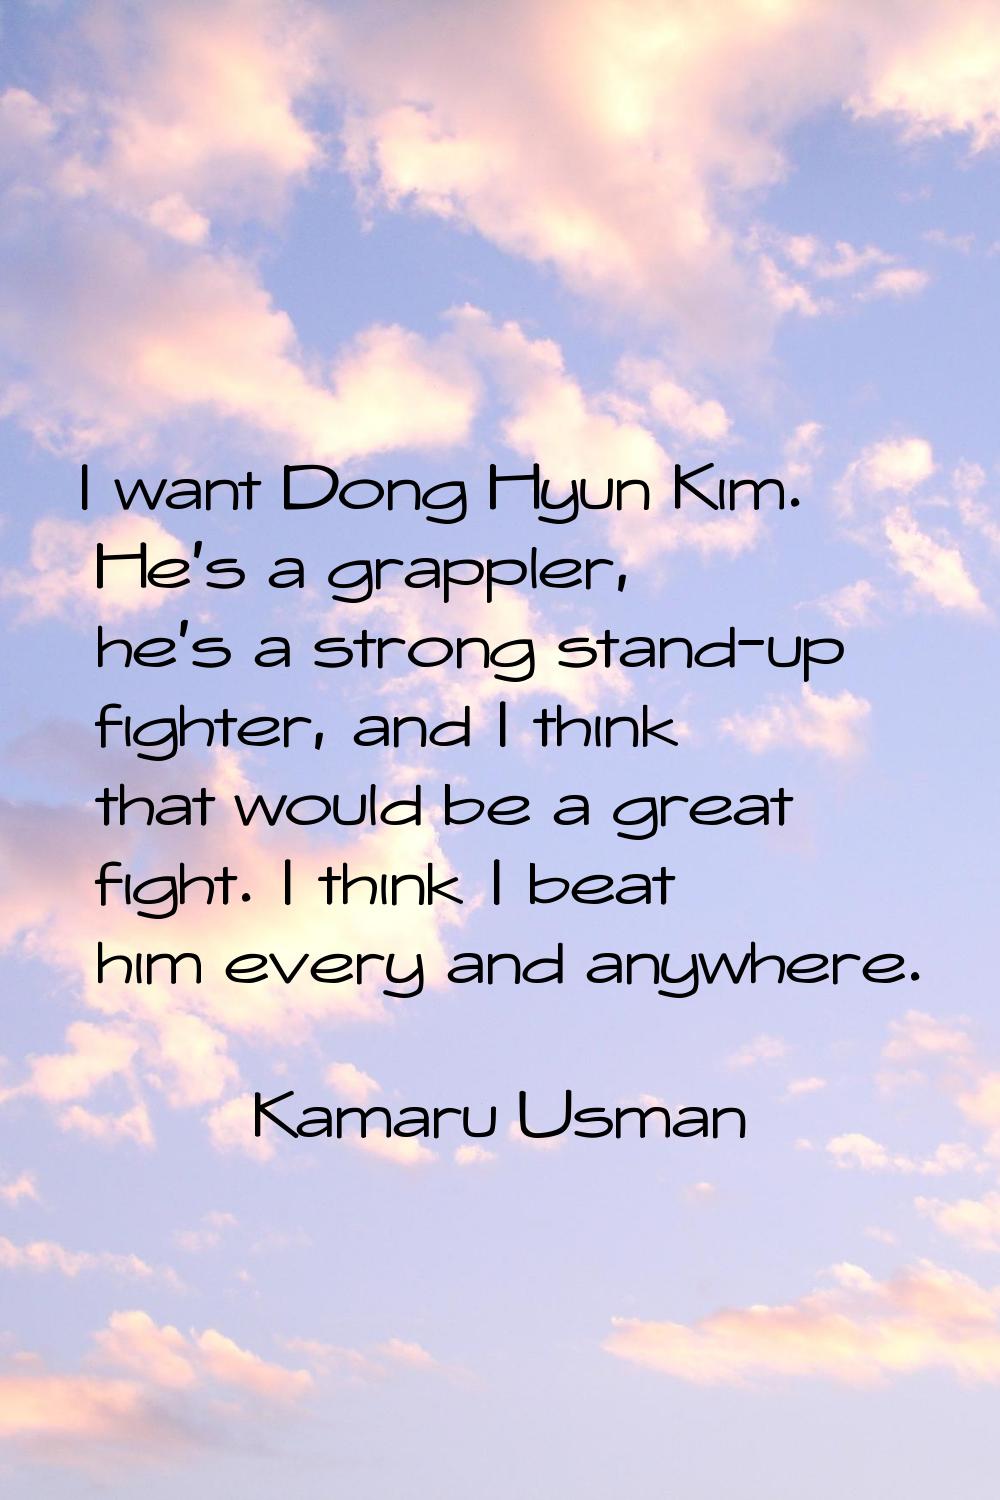 I want Dong Hyun Kim. He's a grappler, he's a strong stand-up fighter, and I think that would be a 